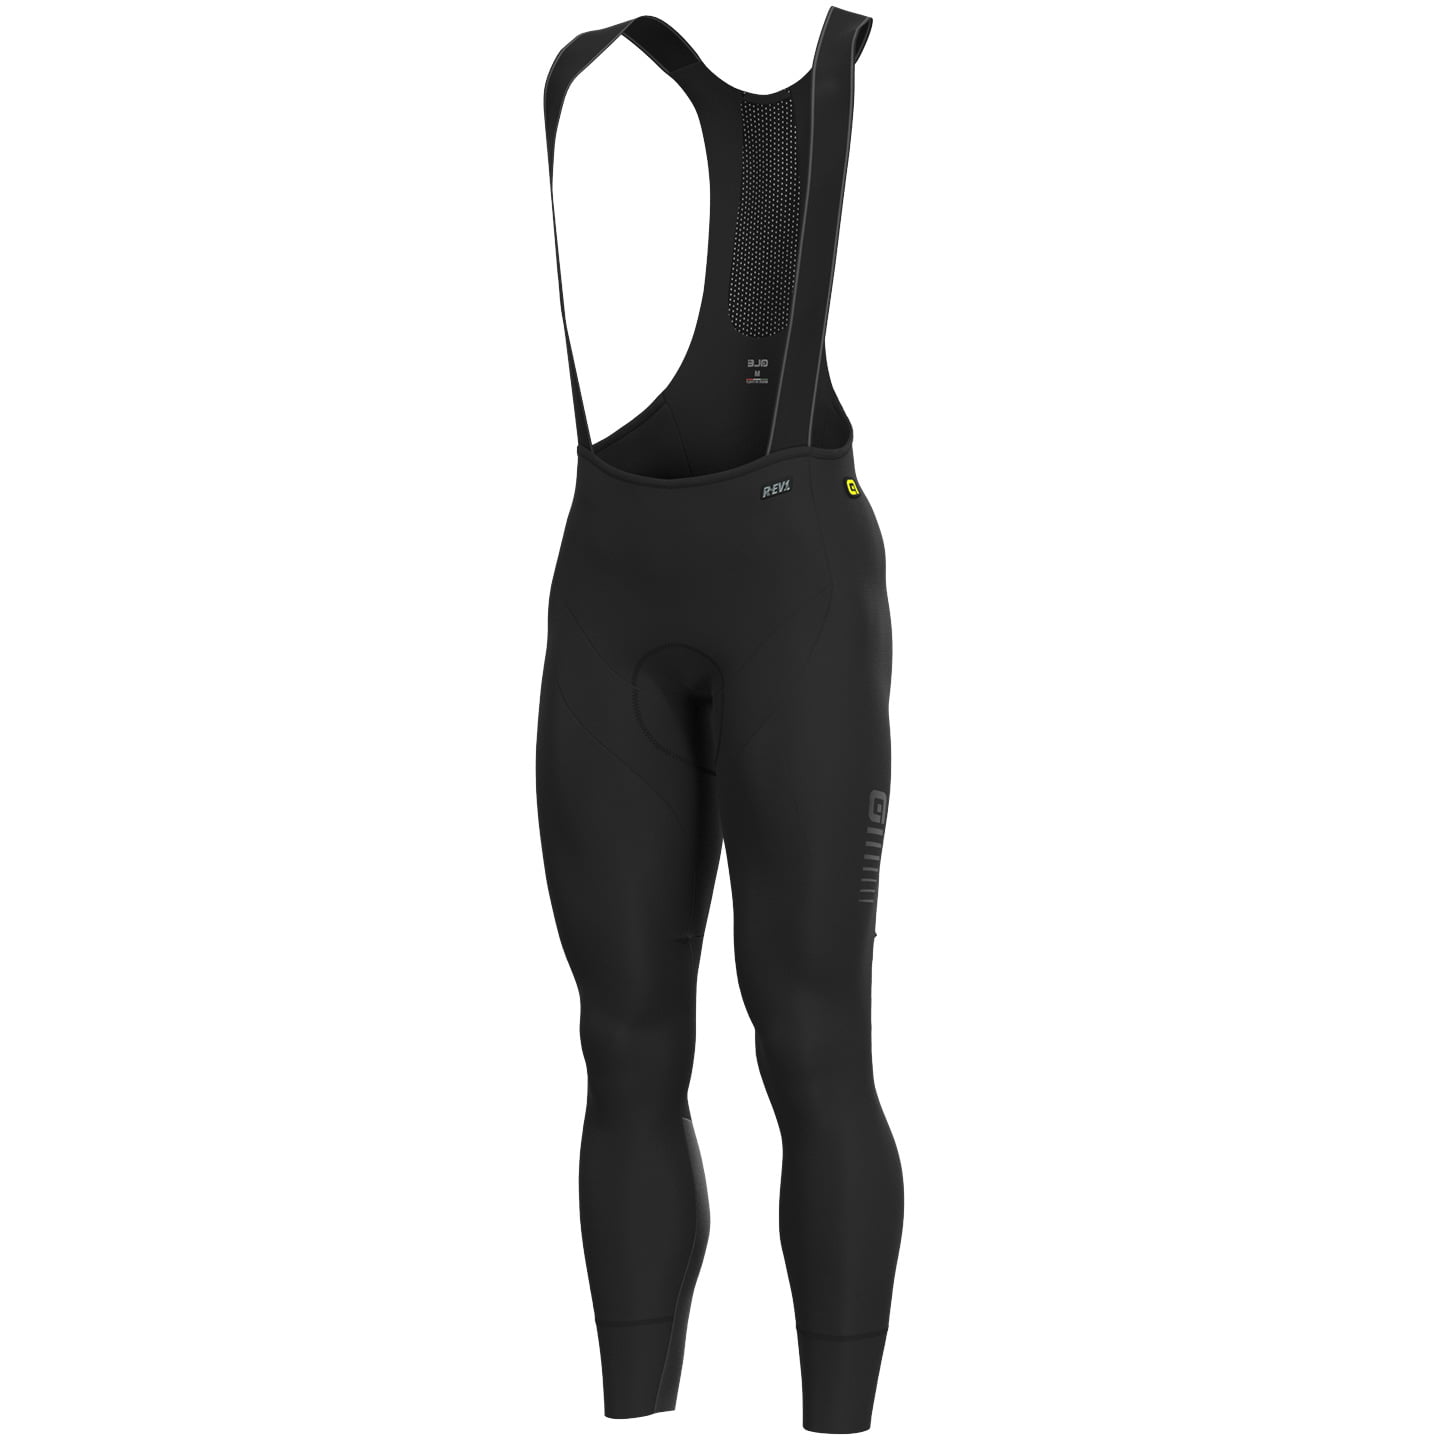 ALE Nordik Plus Bib Tights Bib Tights, for men, size S, Cycle trousers, Cycle clothing